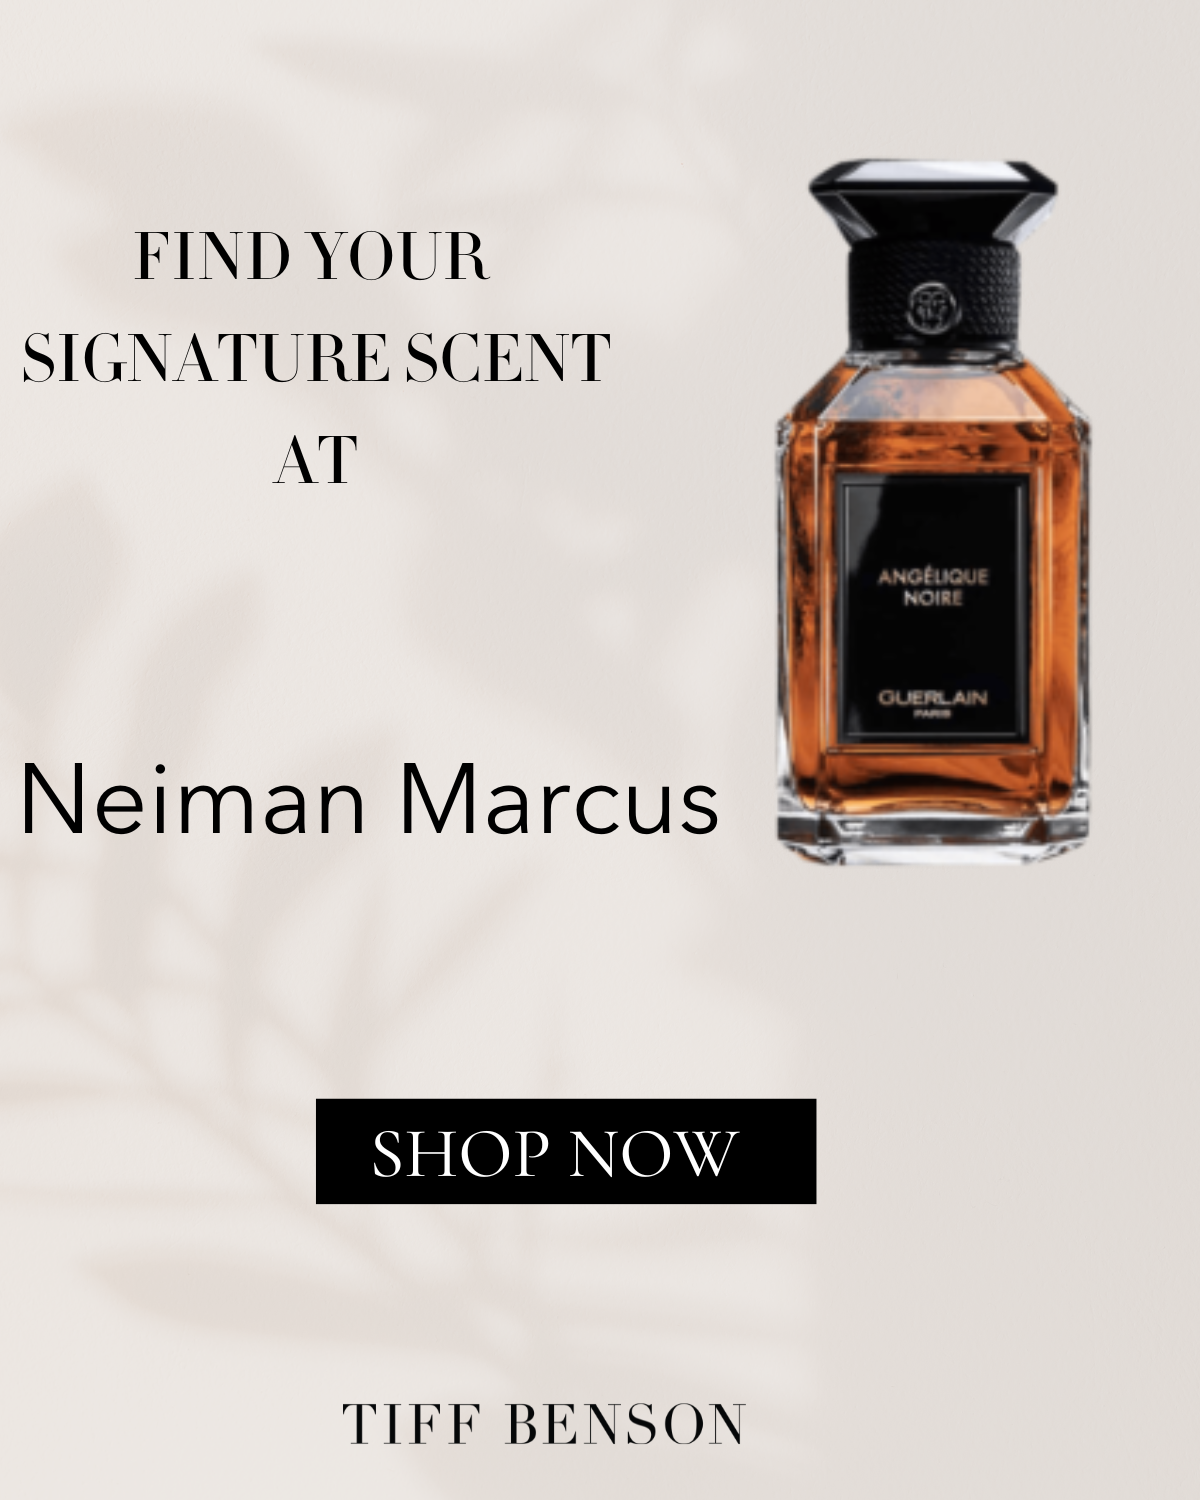 This is how to find a signature scent